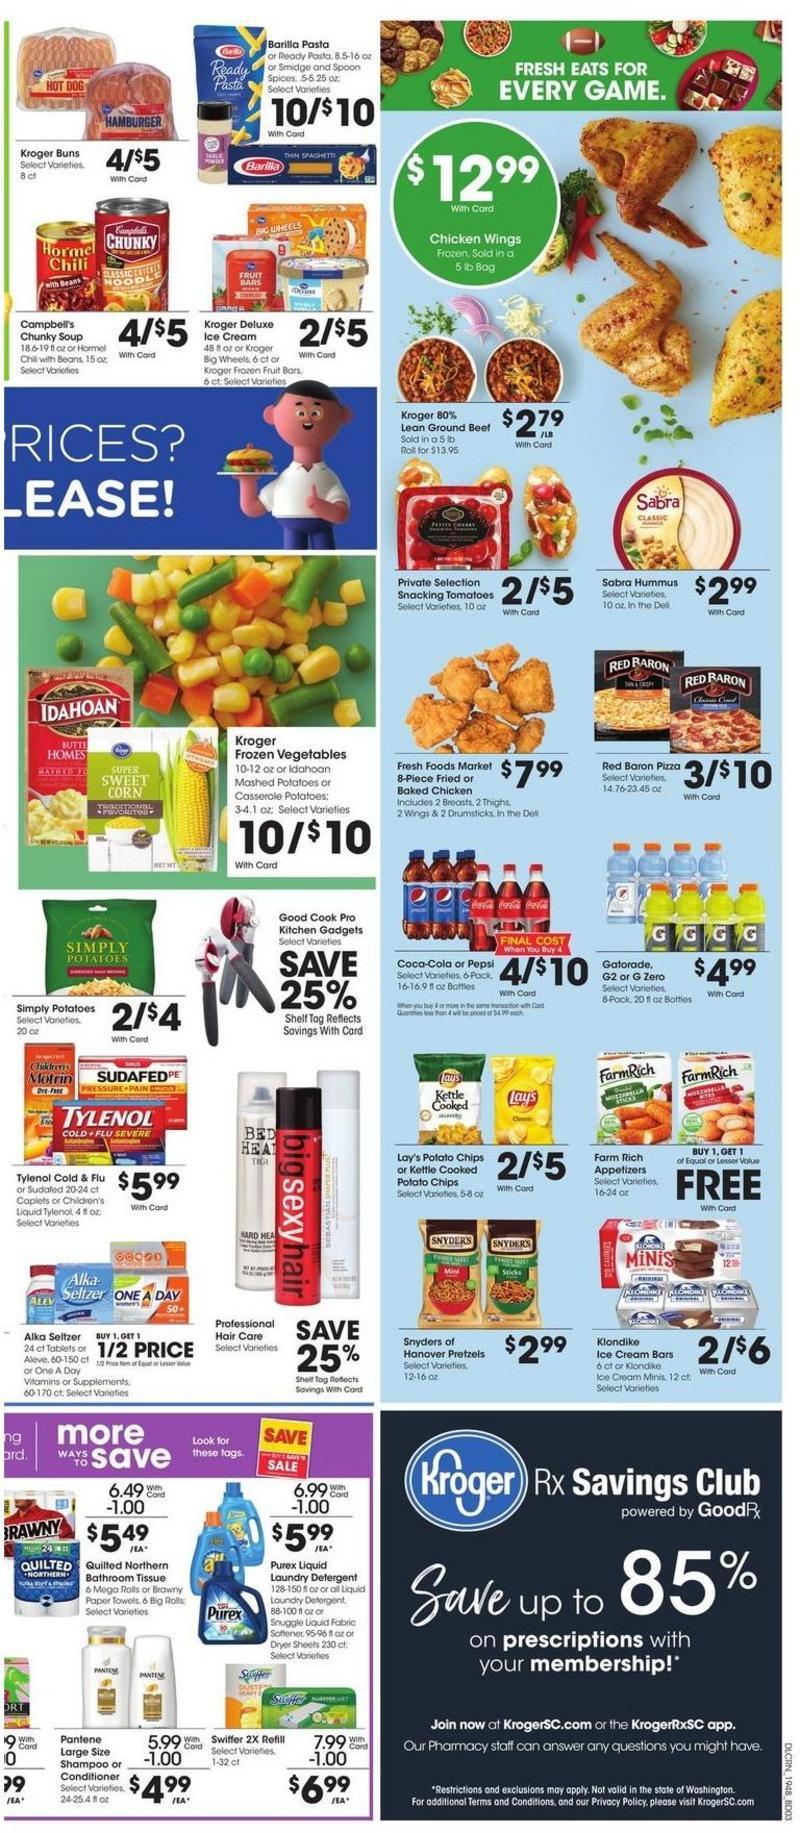 Kroger Weekly Ad from January 2